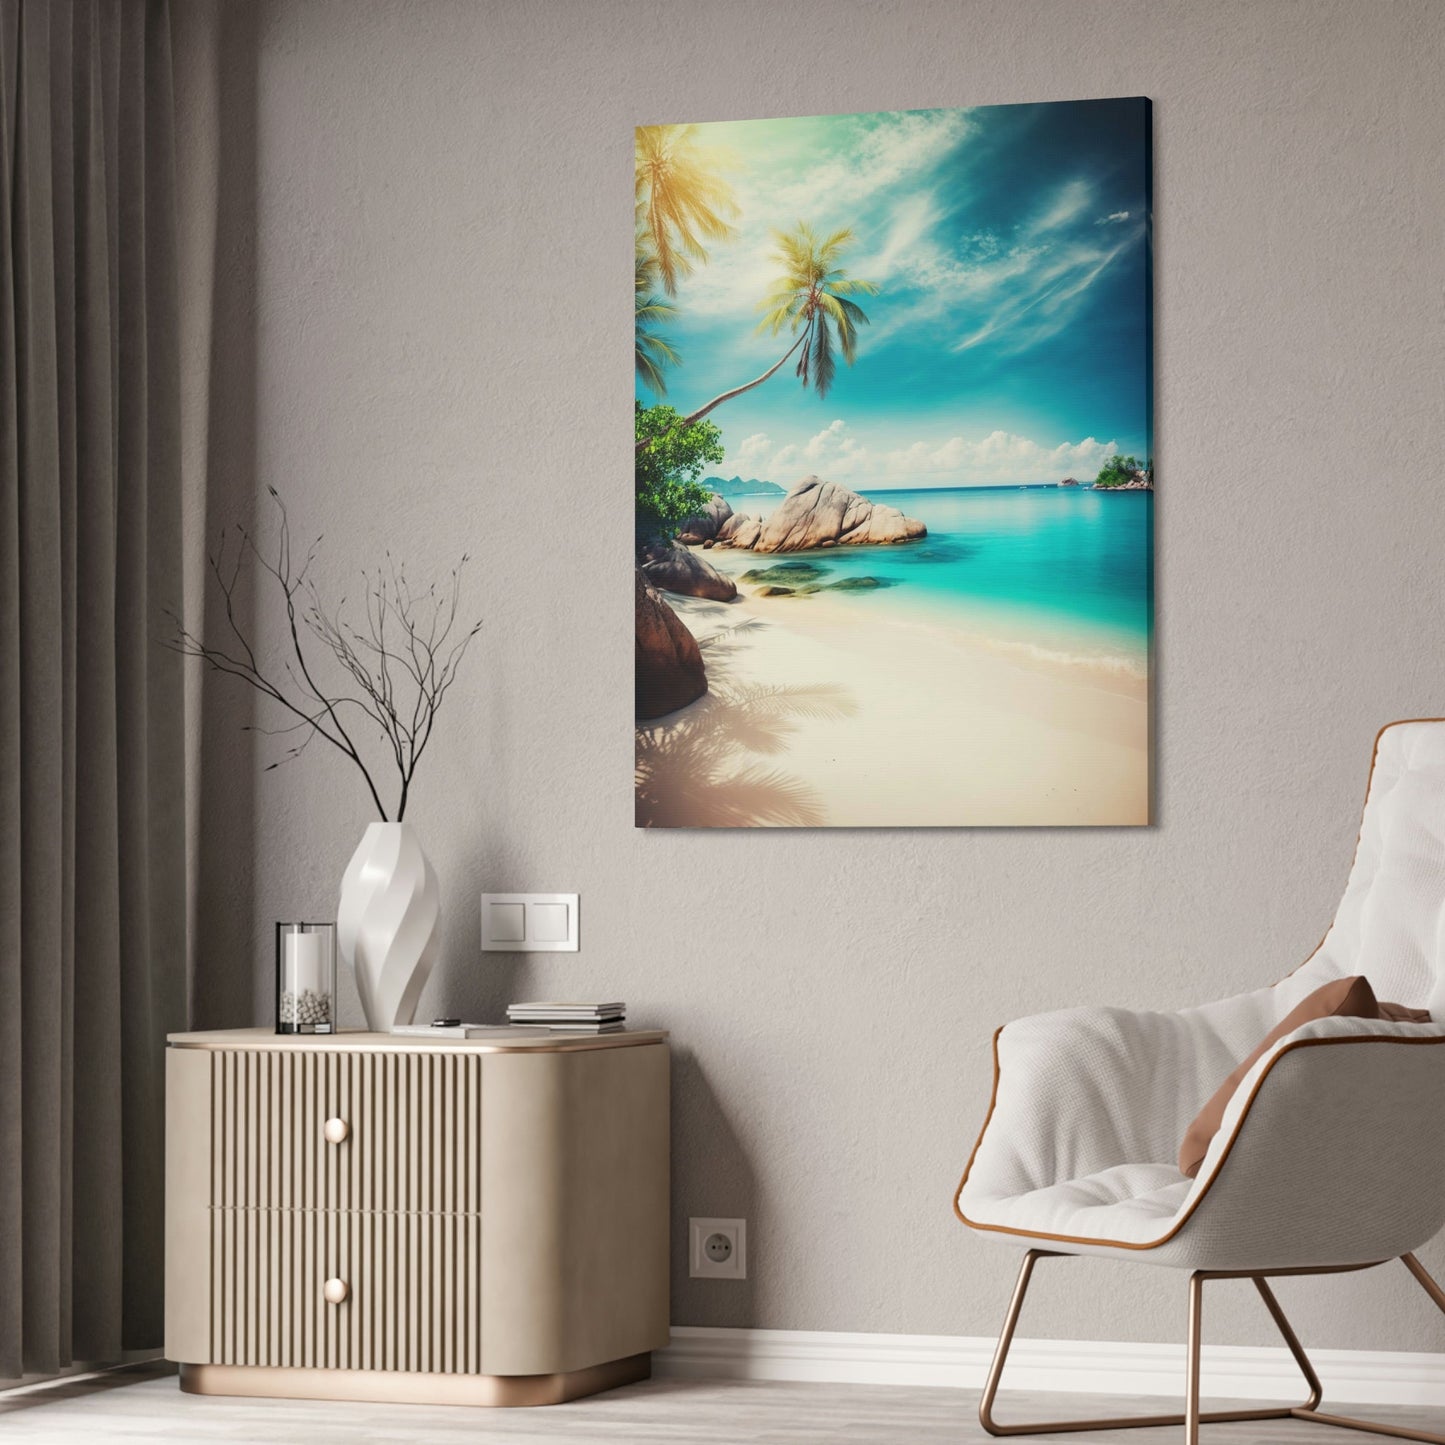 Beachfront Beauty: Poster of a Scenic Island Beach Scene on a Framed Poster